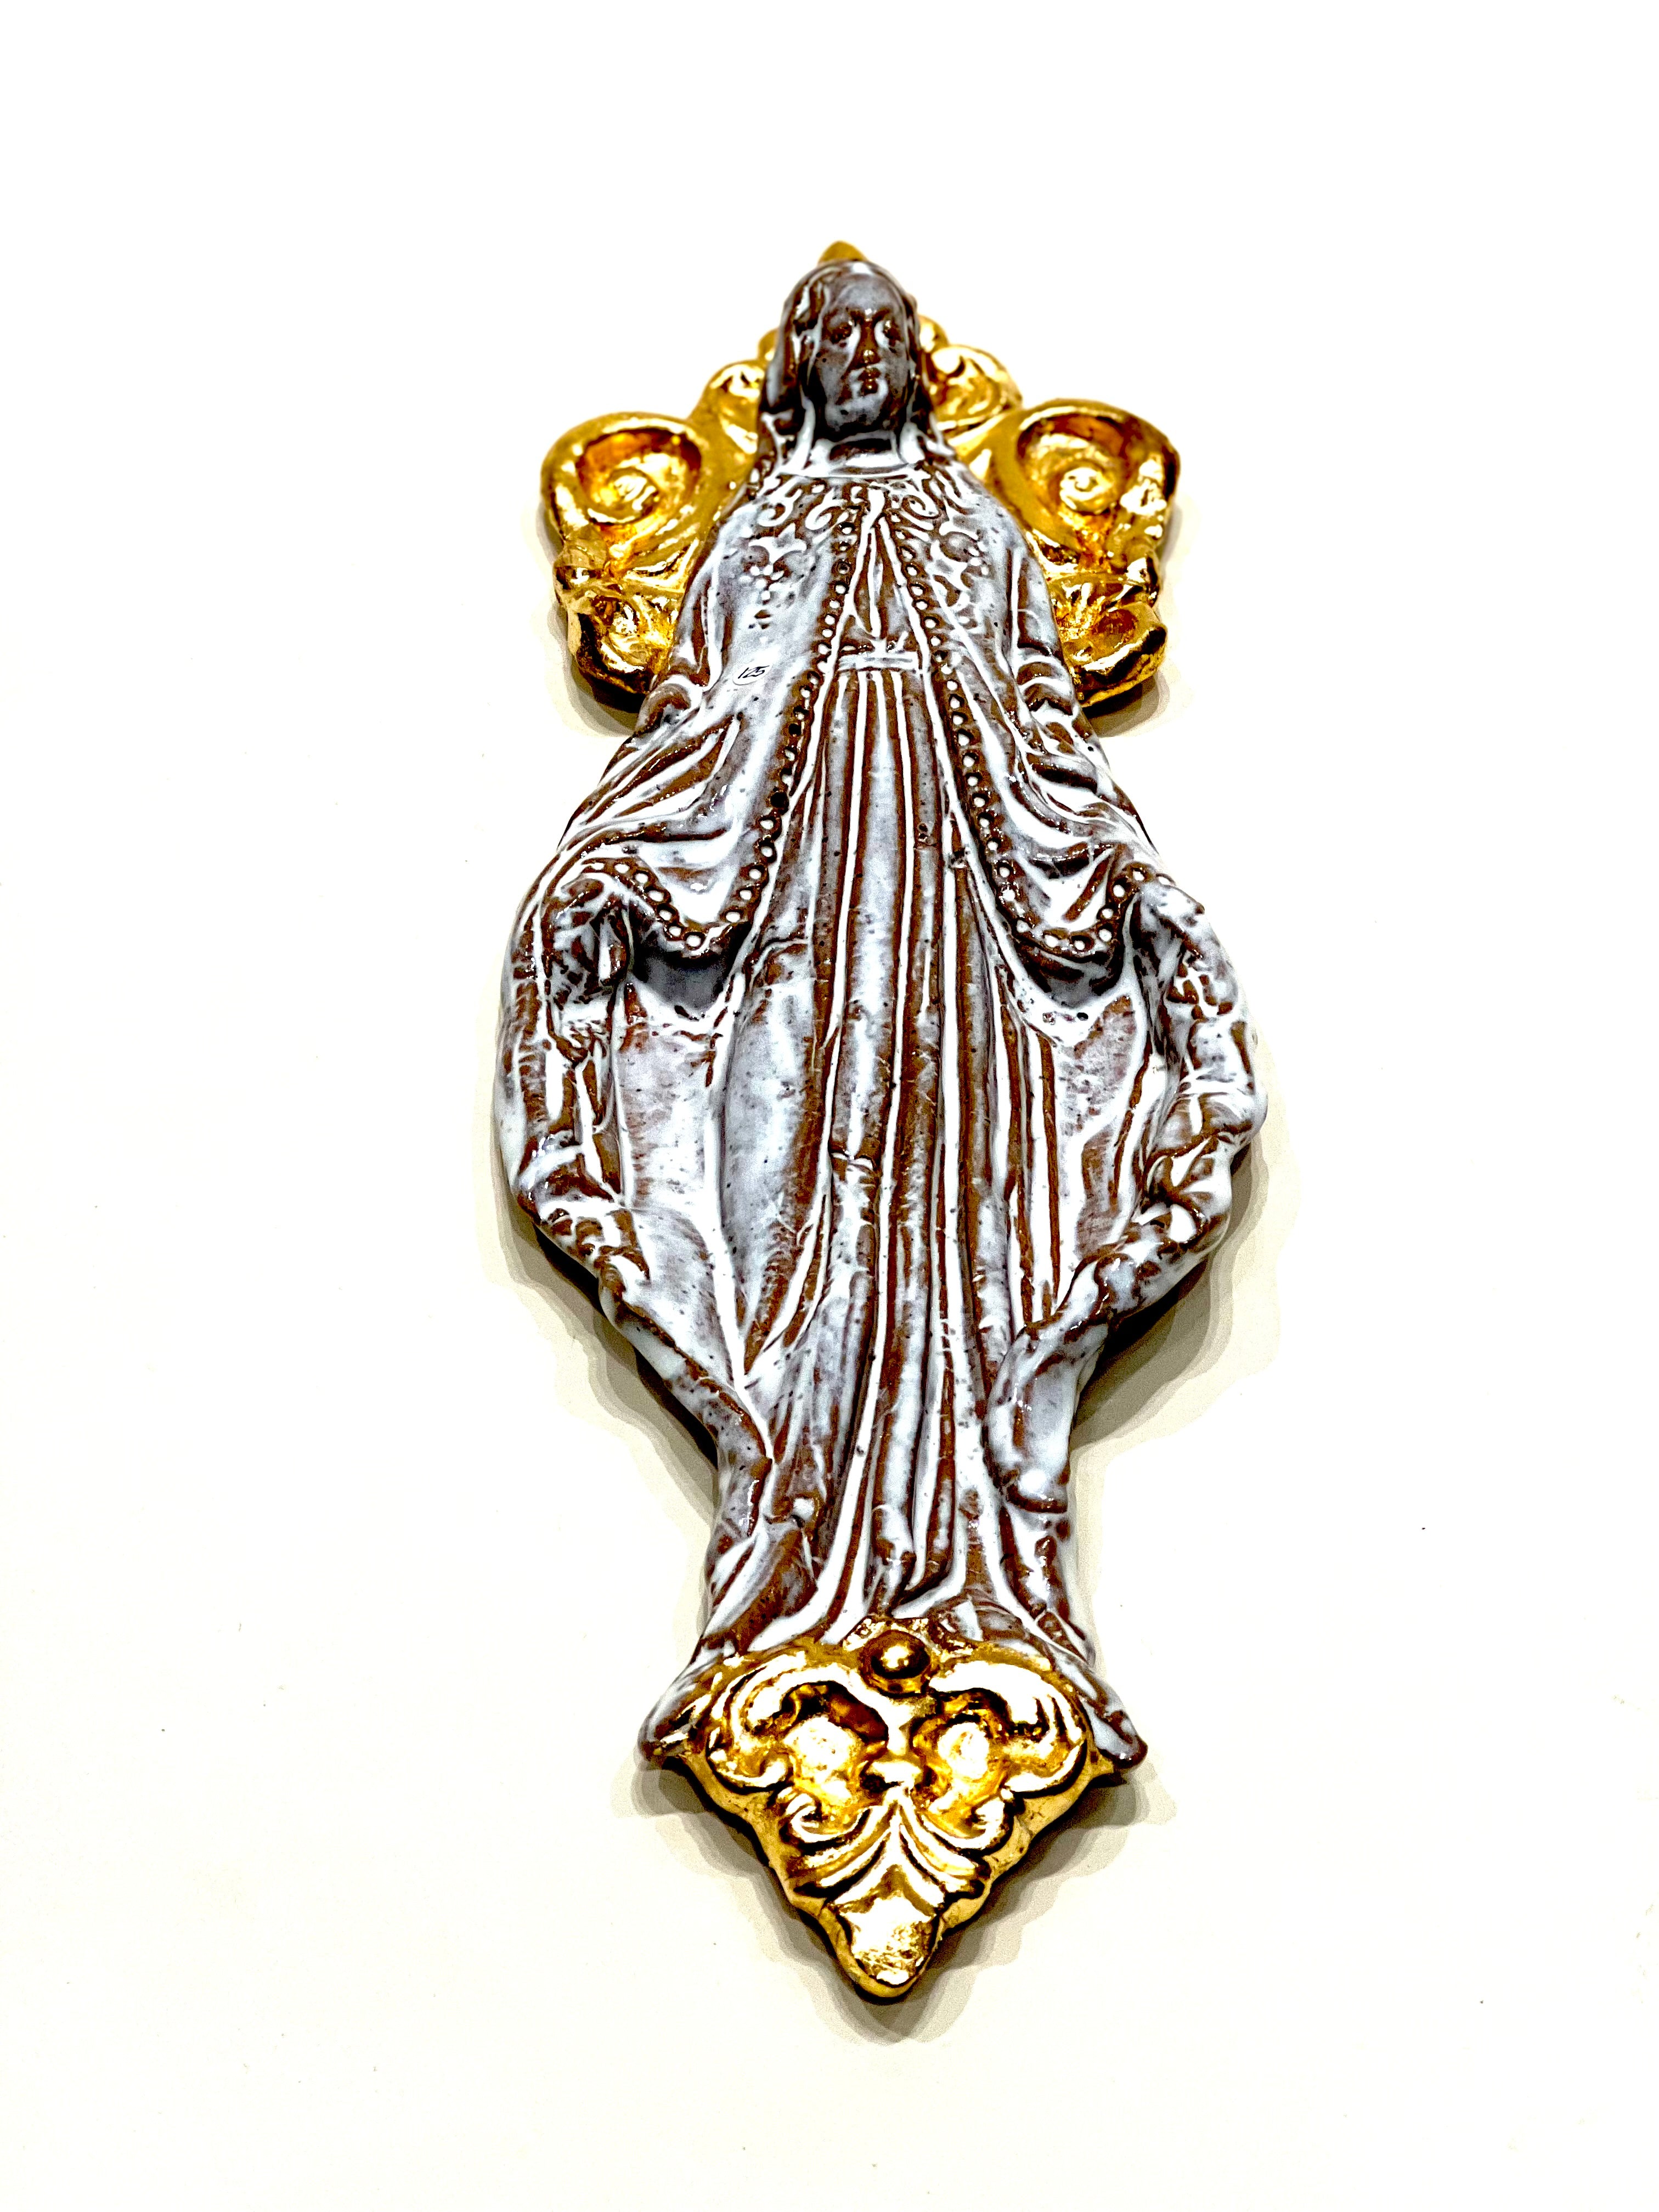 Blessed mother White Glaze w/ Gold Cartouche